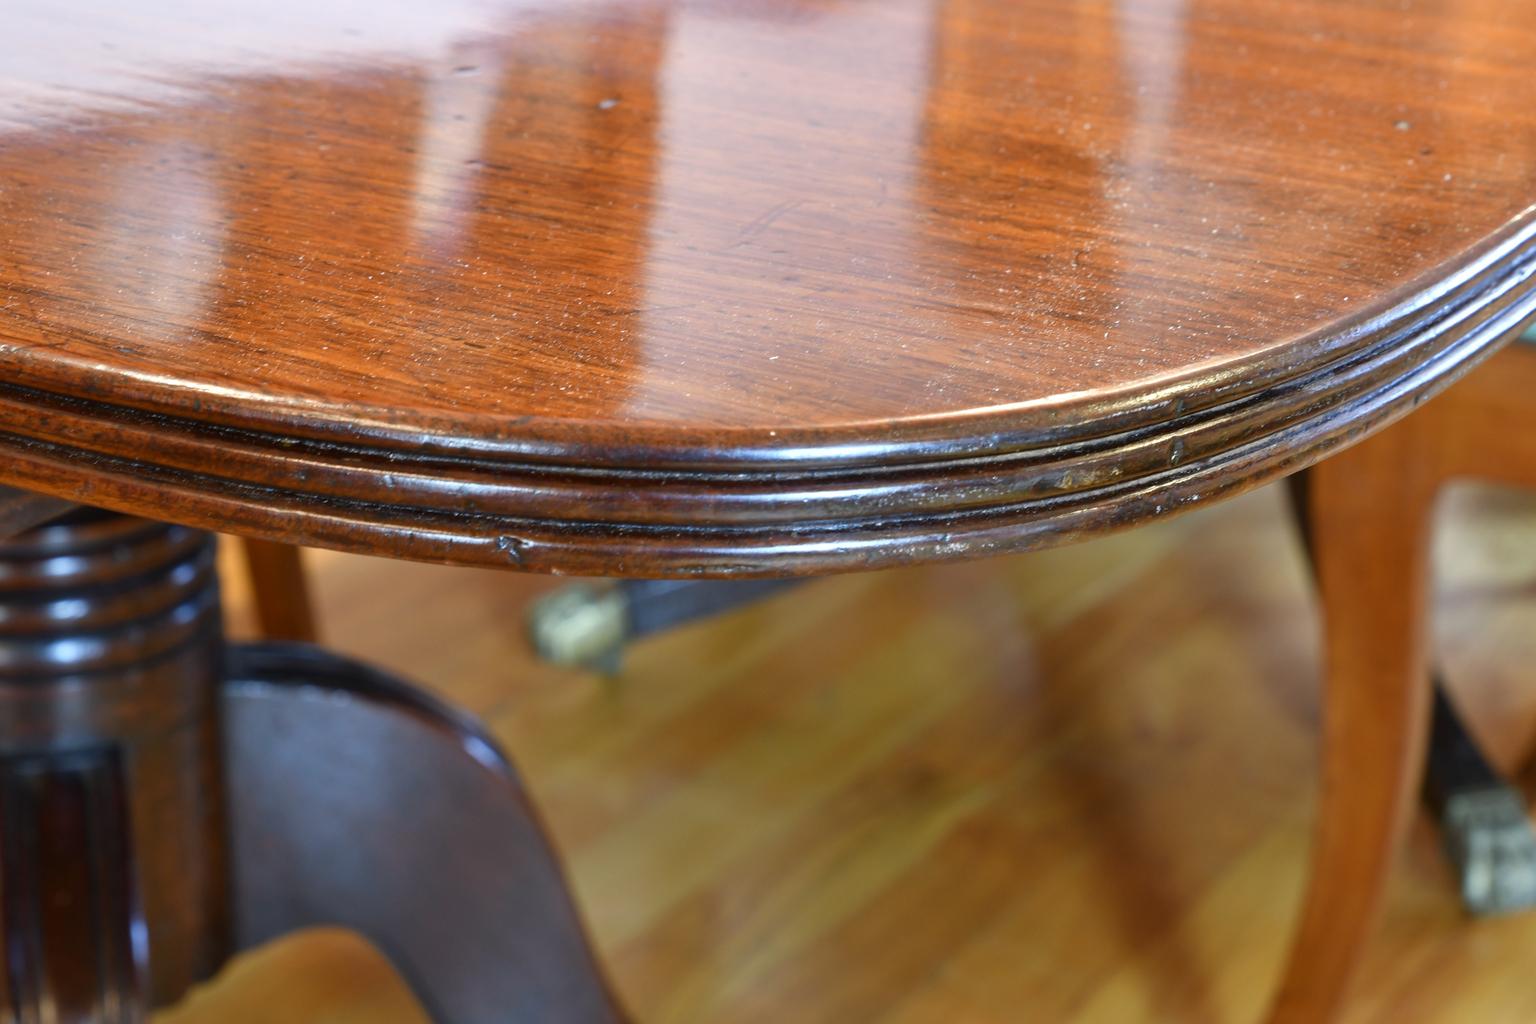 Polished Antique Regency-Style Dining Table in Mahogany with Three Pedestals